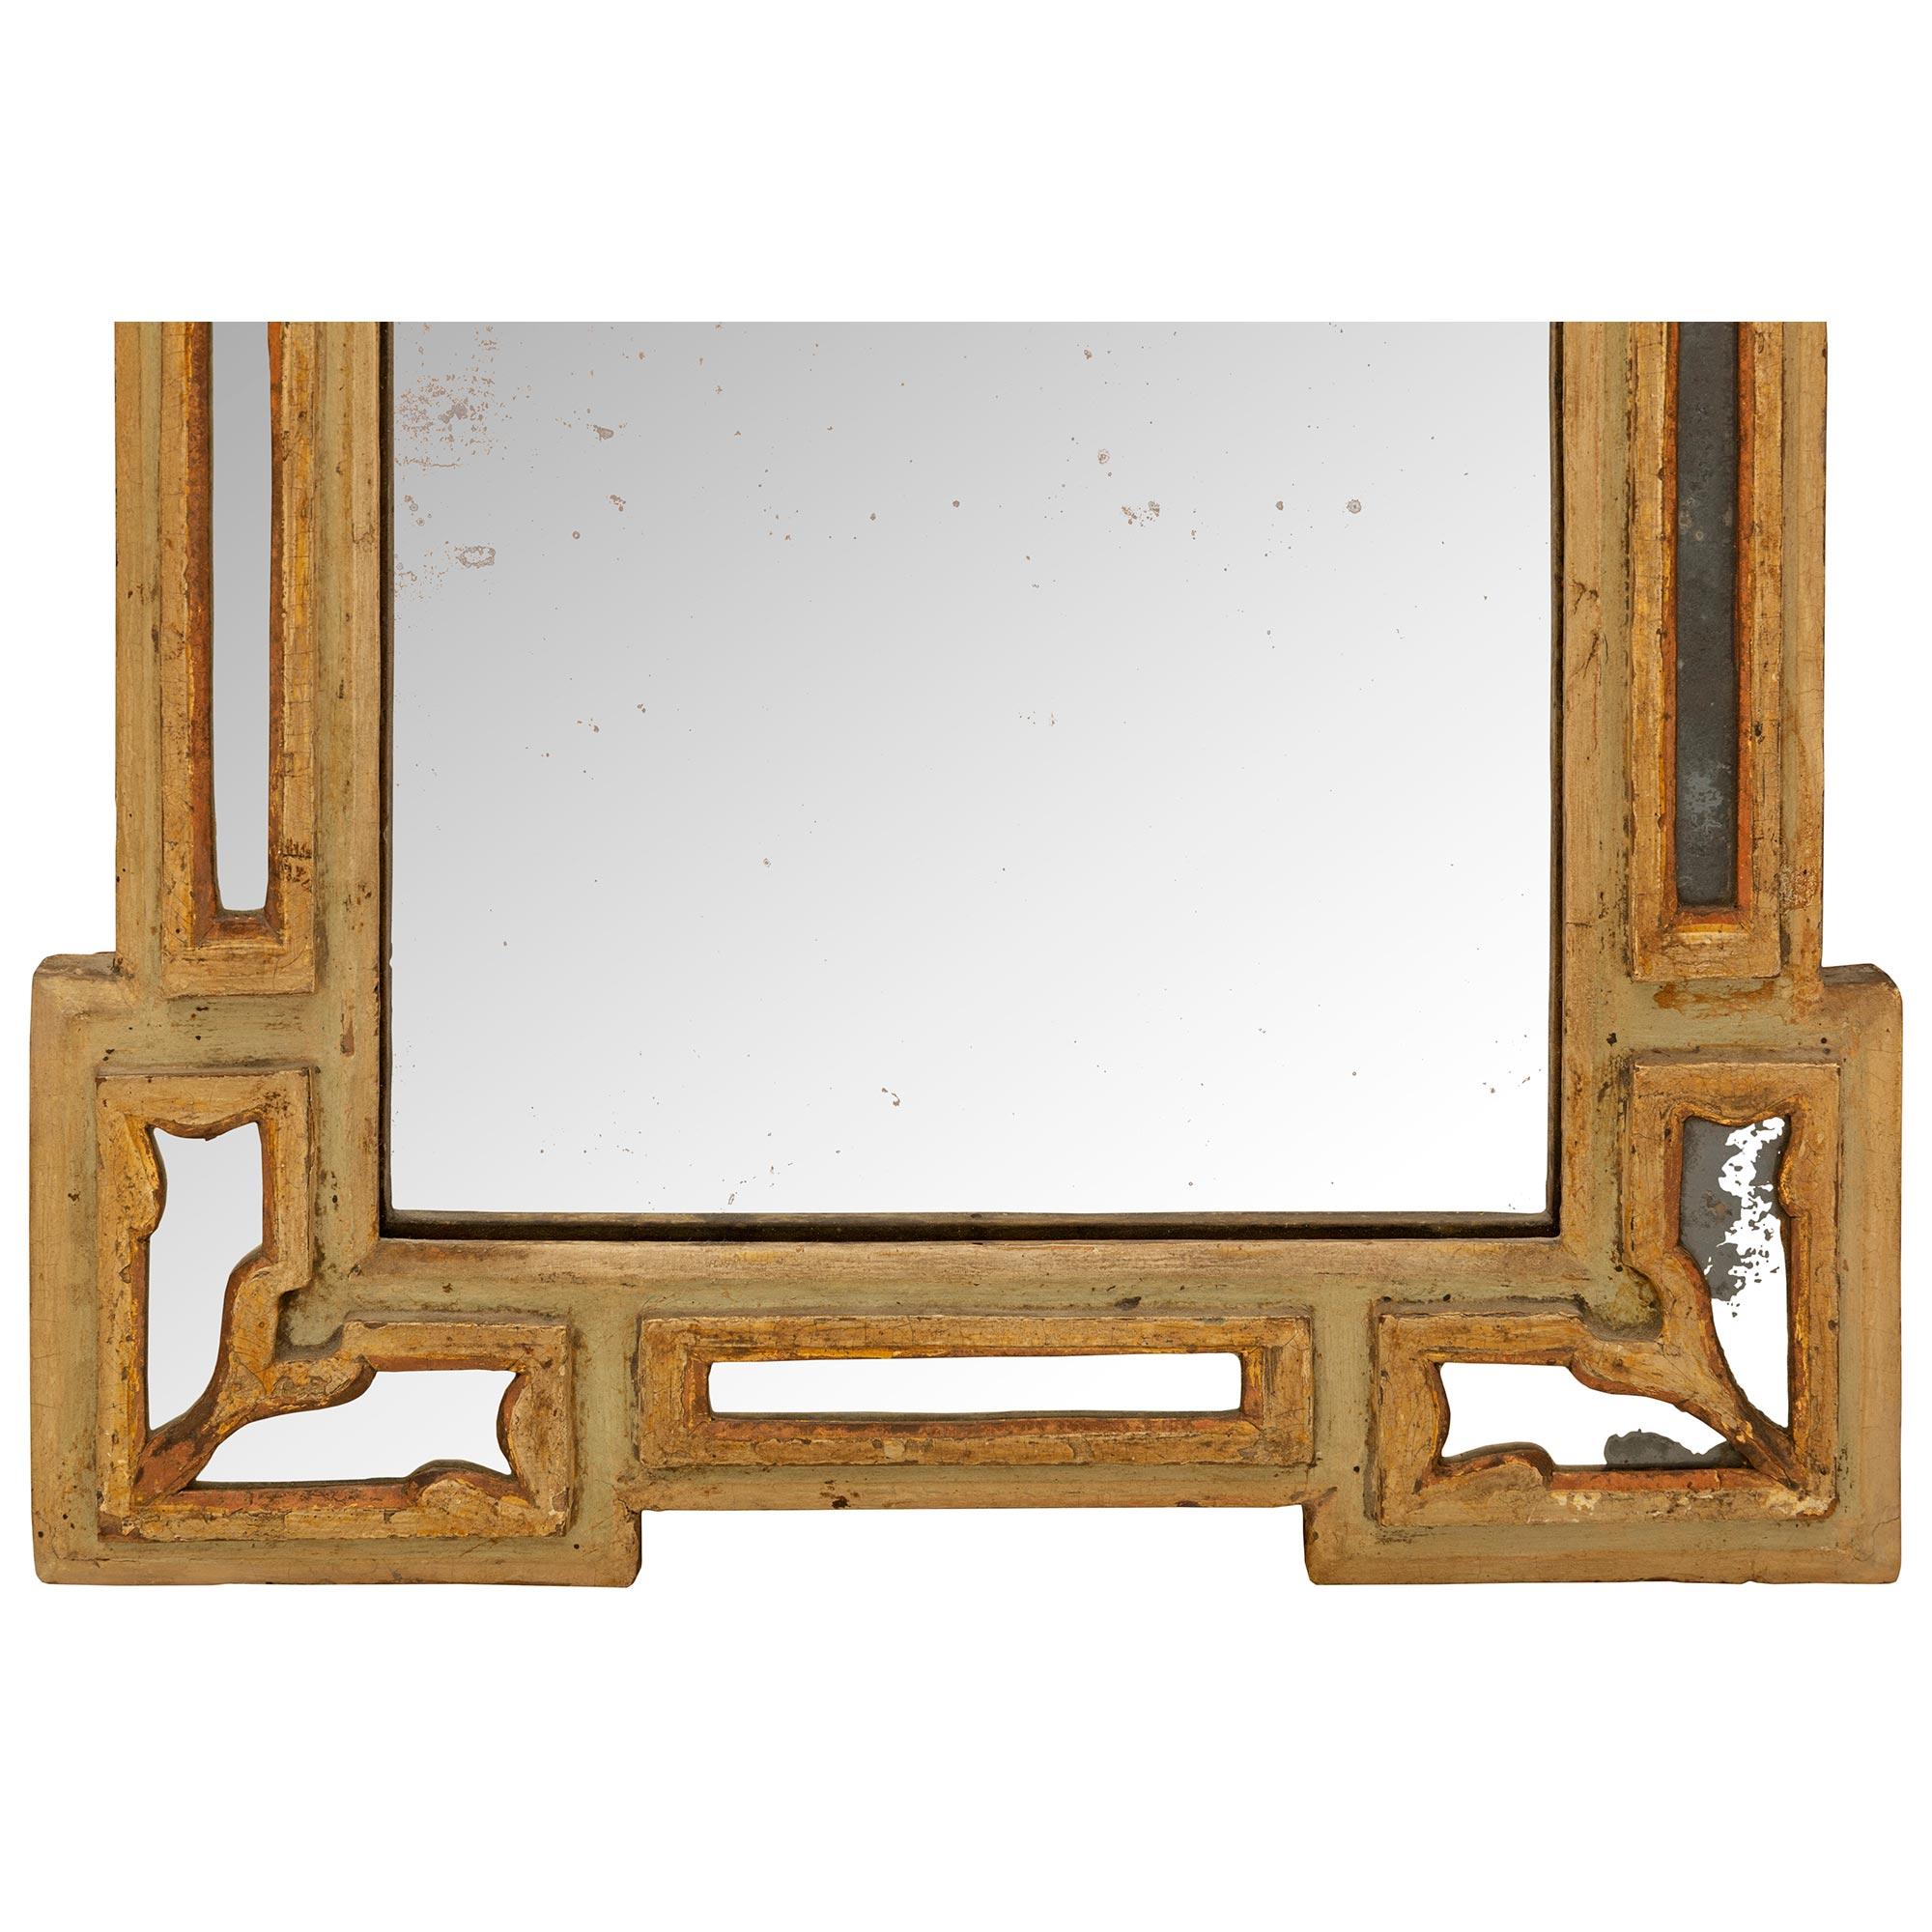 Petrified Wood talian 18th Century Baroque St. Double Frame Patinated Wood And Gilt Mirror For Sale